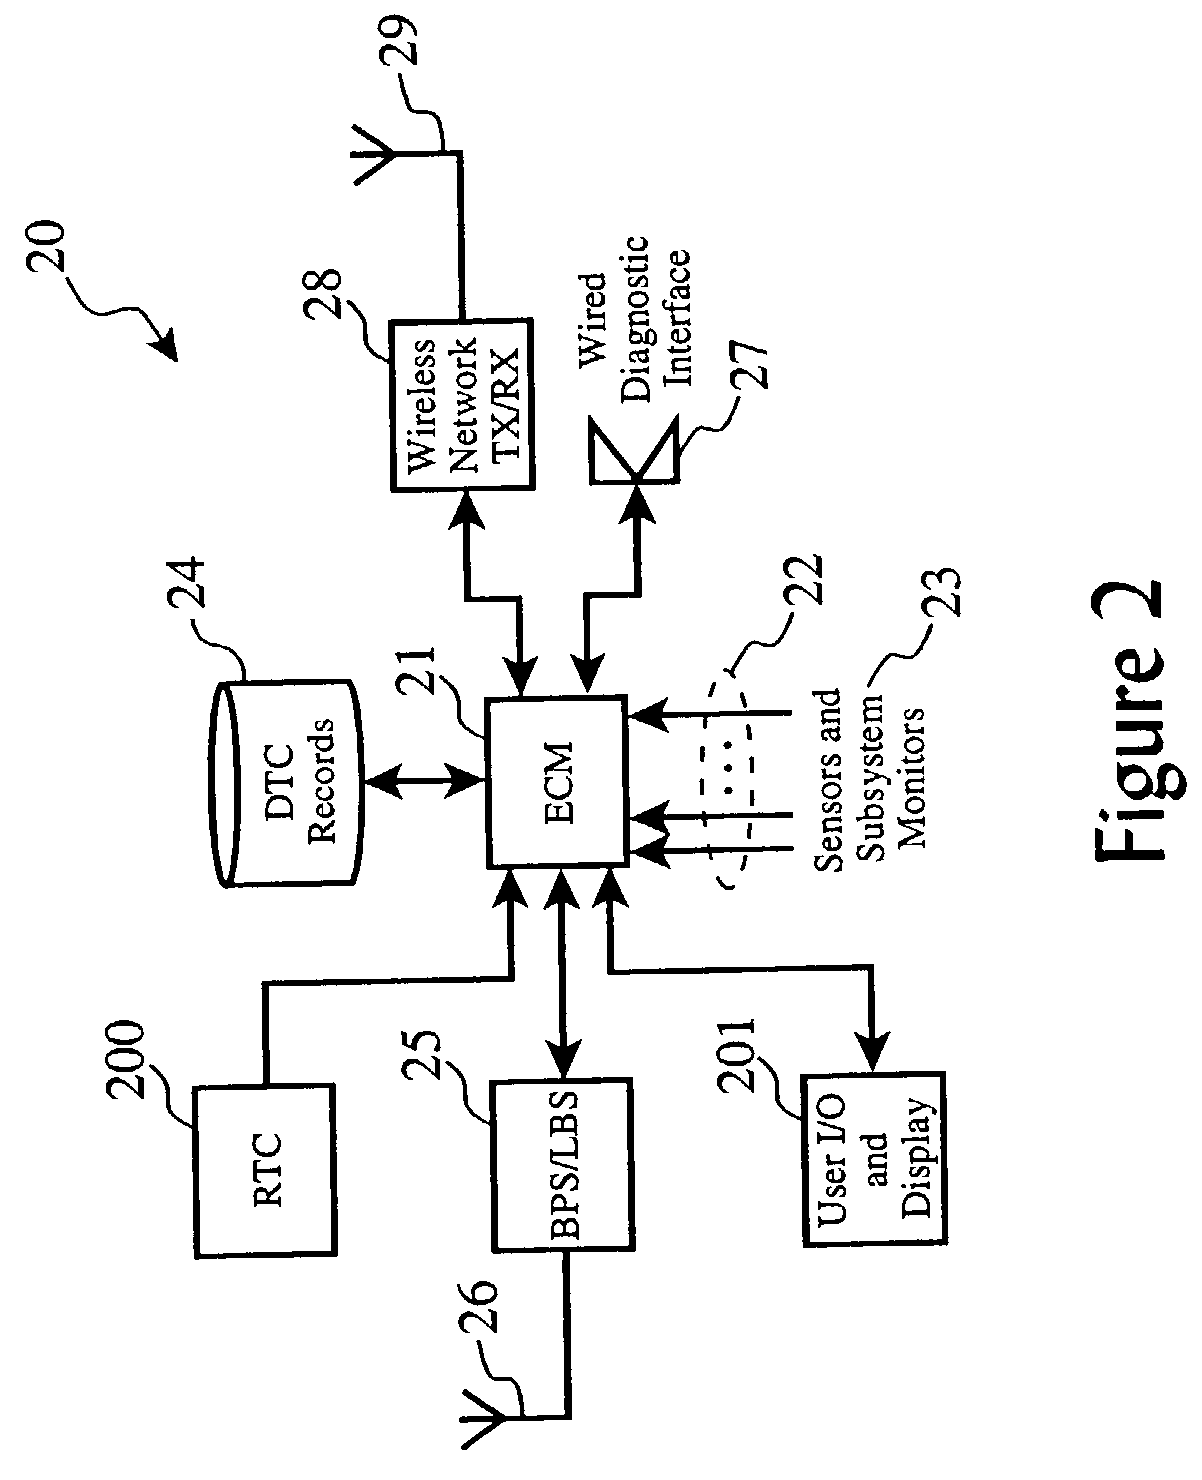 Location-based intelligent remote vehicle function control